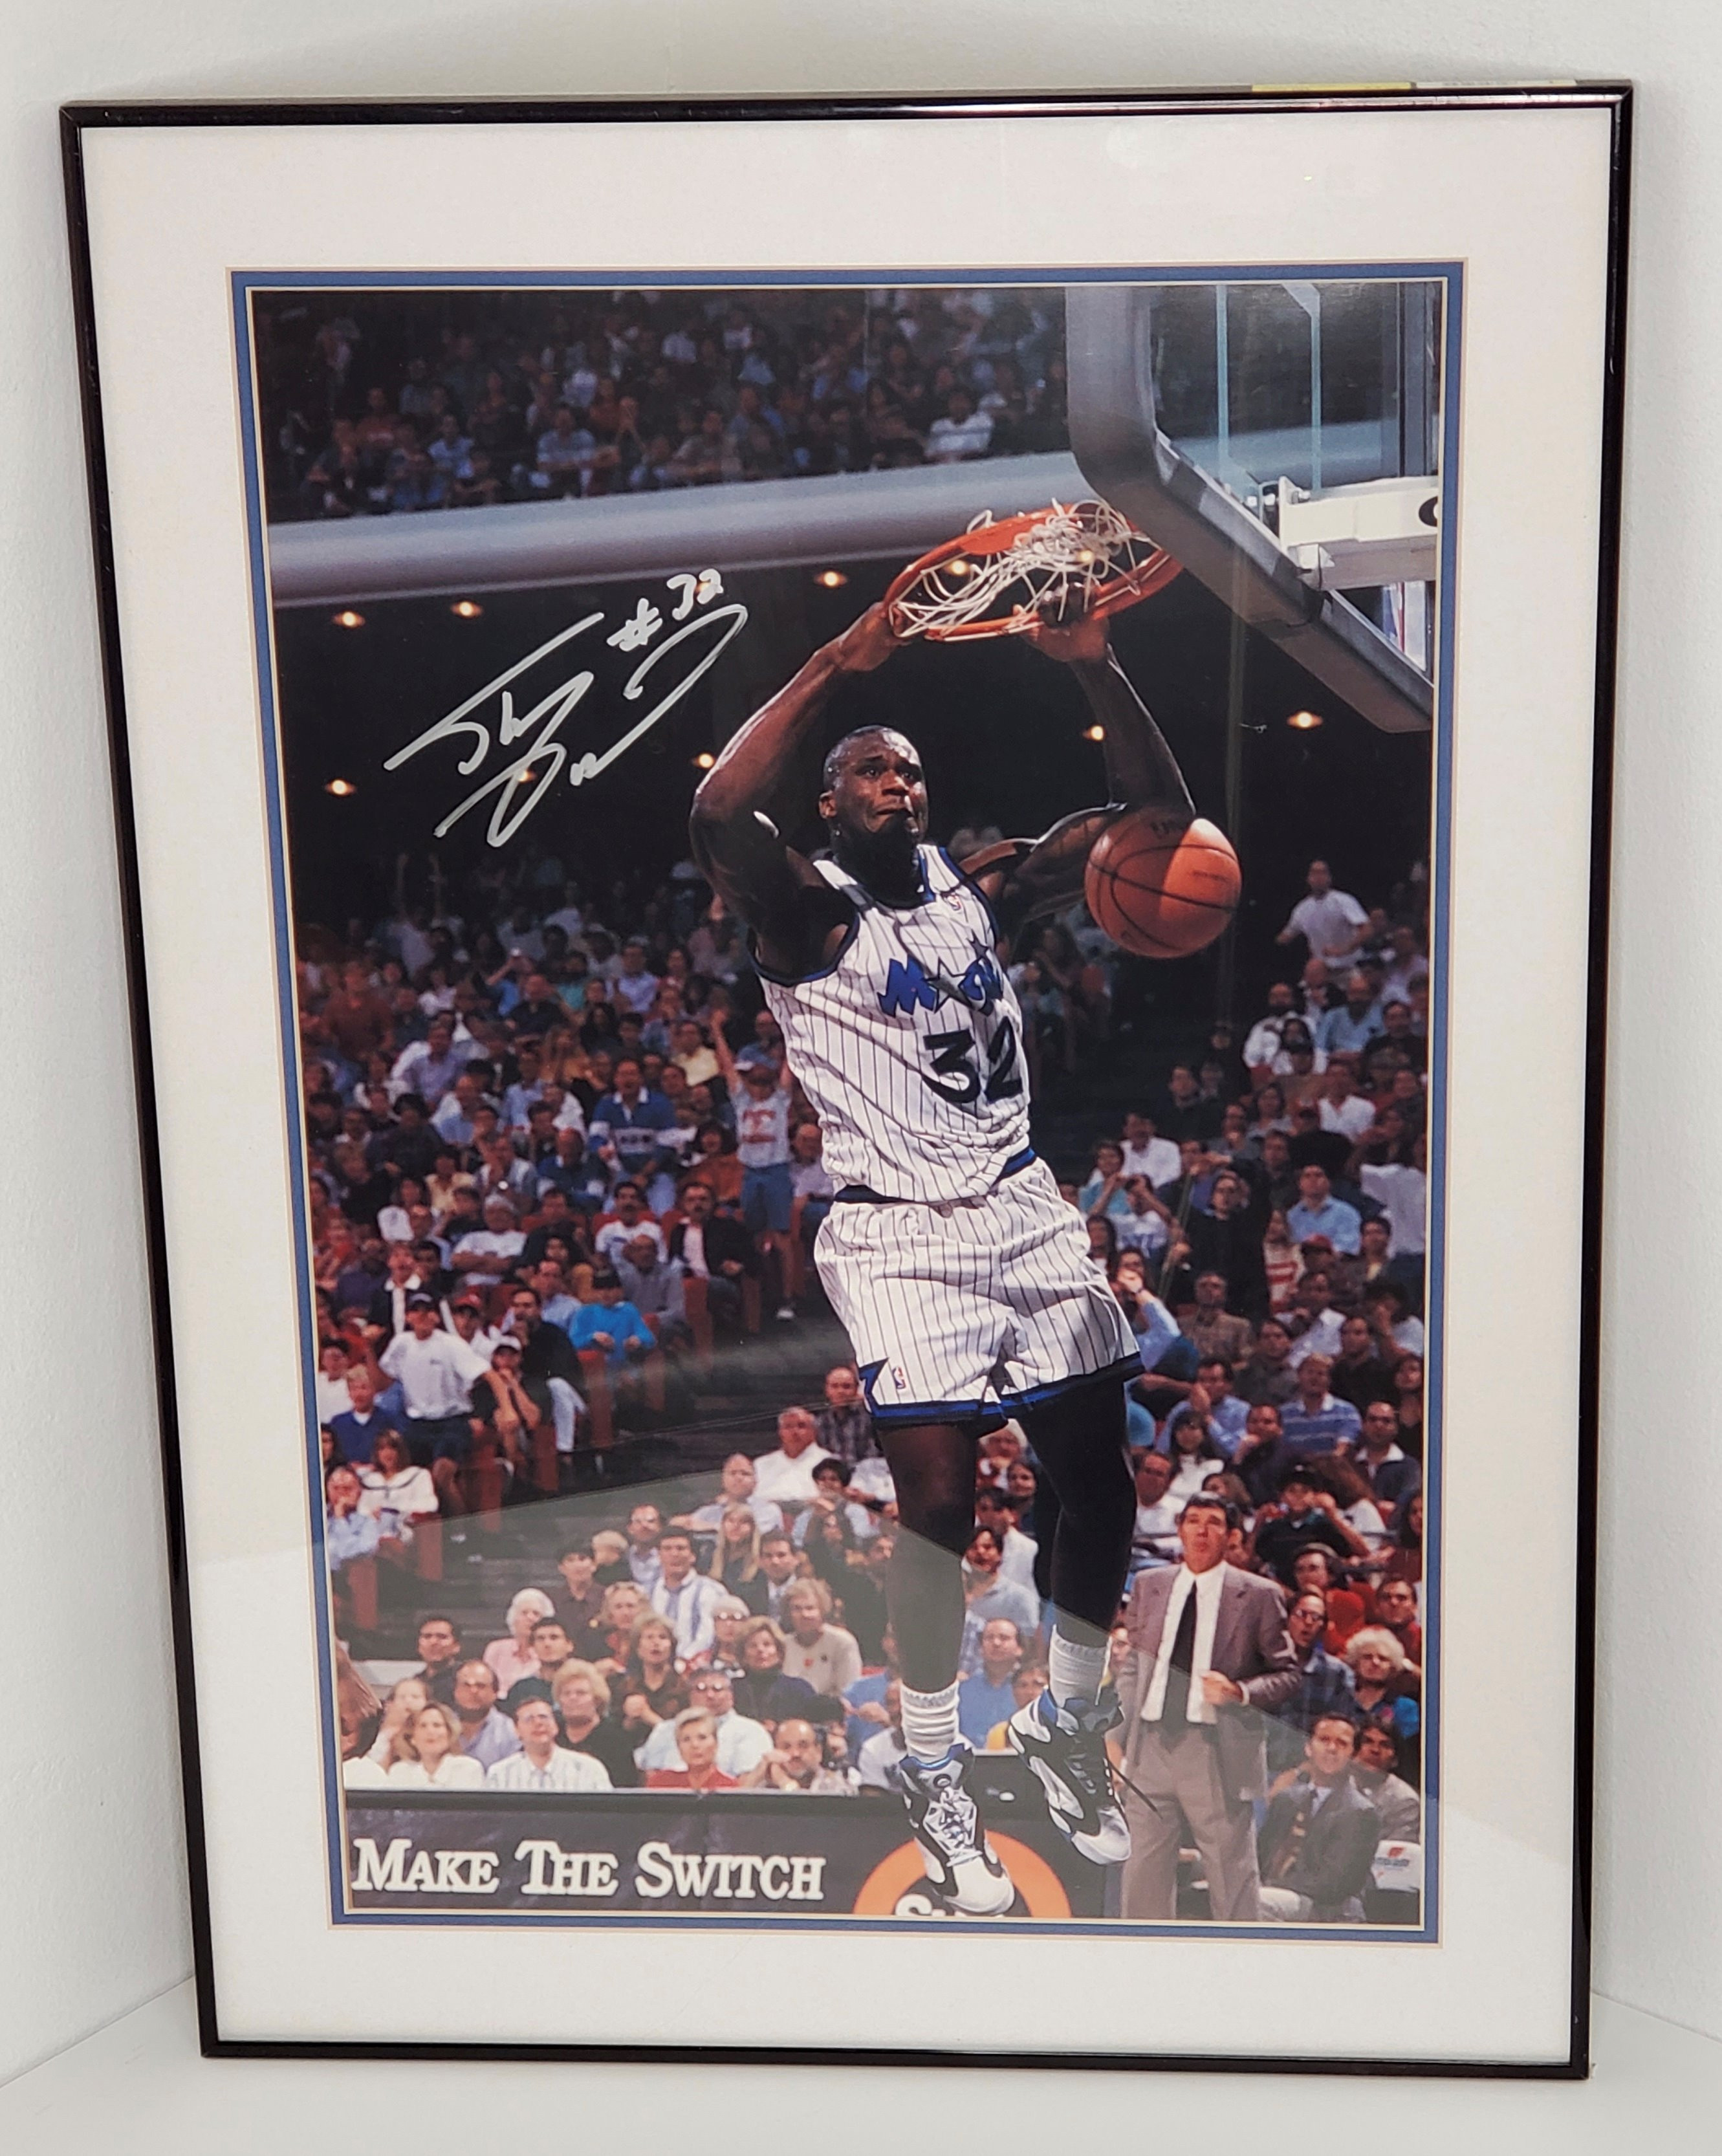 Shaq was the #1 Overall Draft Pick for the NBA in 1992. He is a four time champ and three time MVP. The poster has a certificate of Authenticity from The Scoreboard Inc. and is number 110 out of 1992 editions.